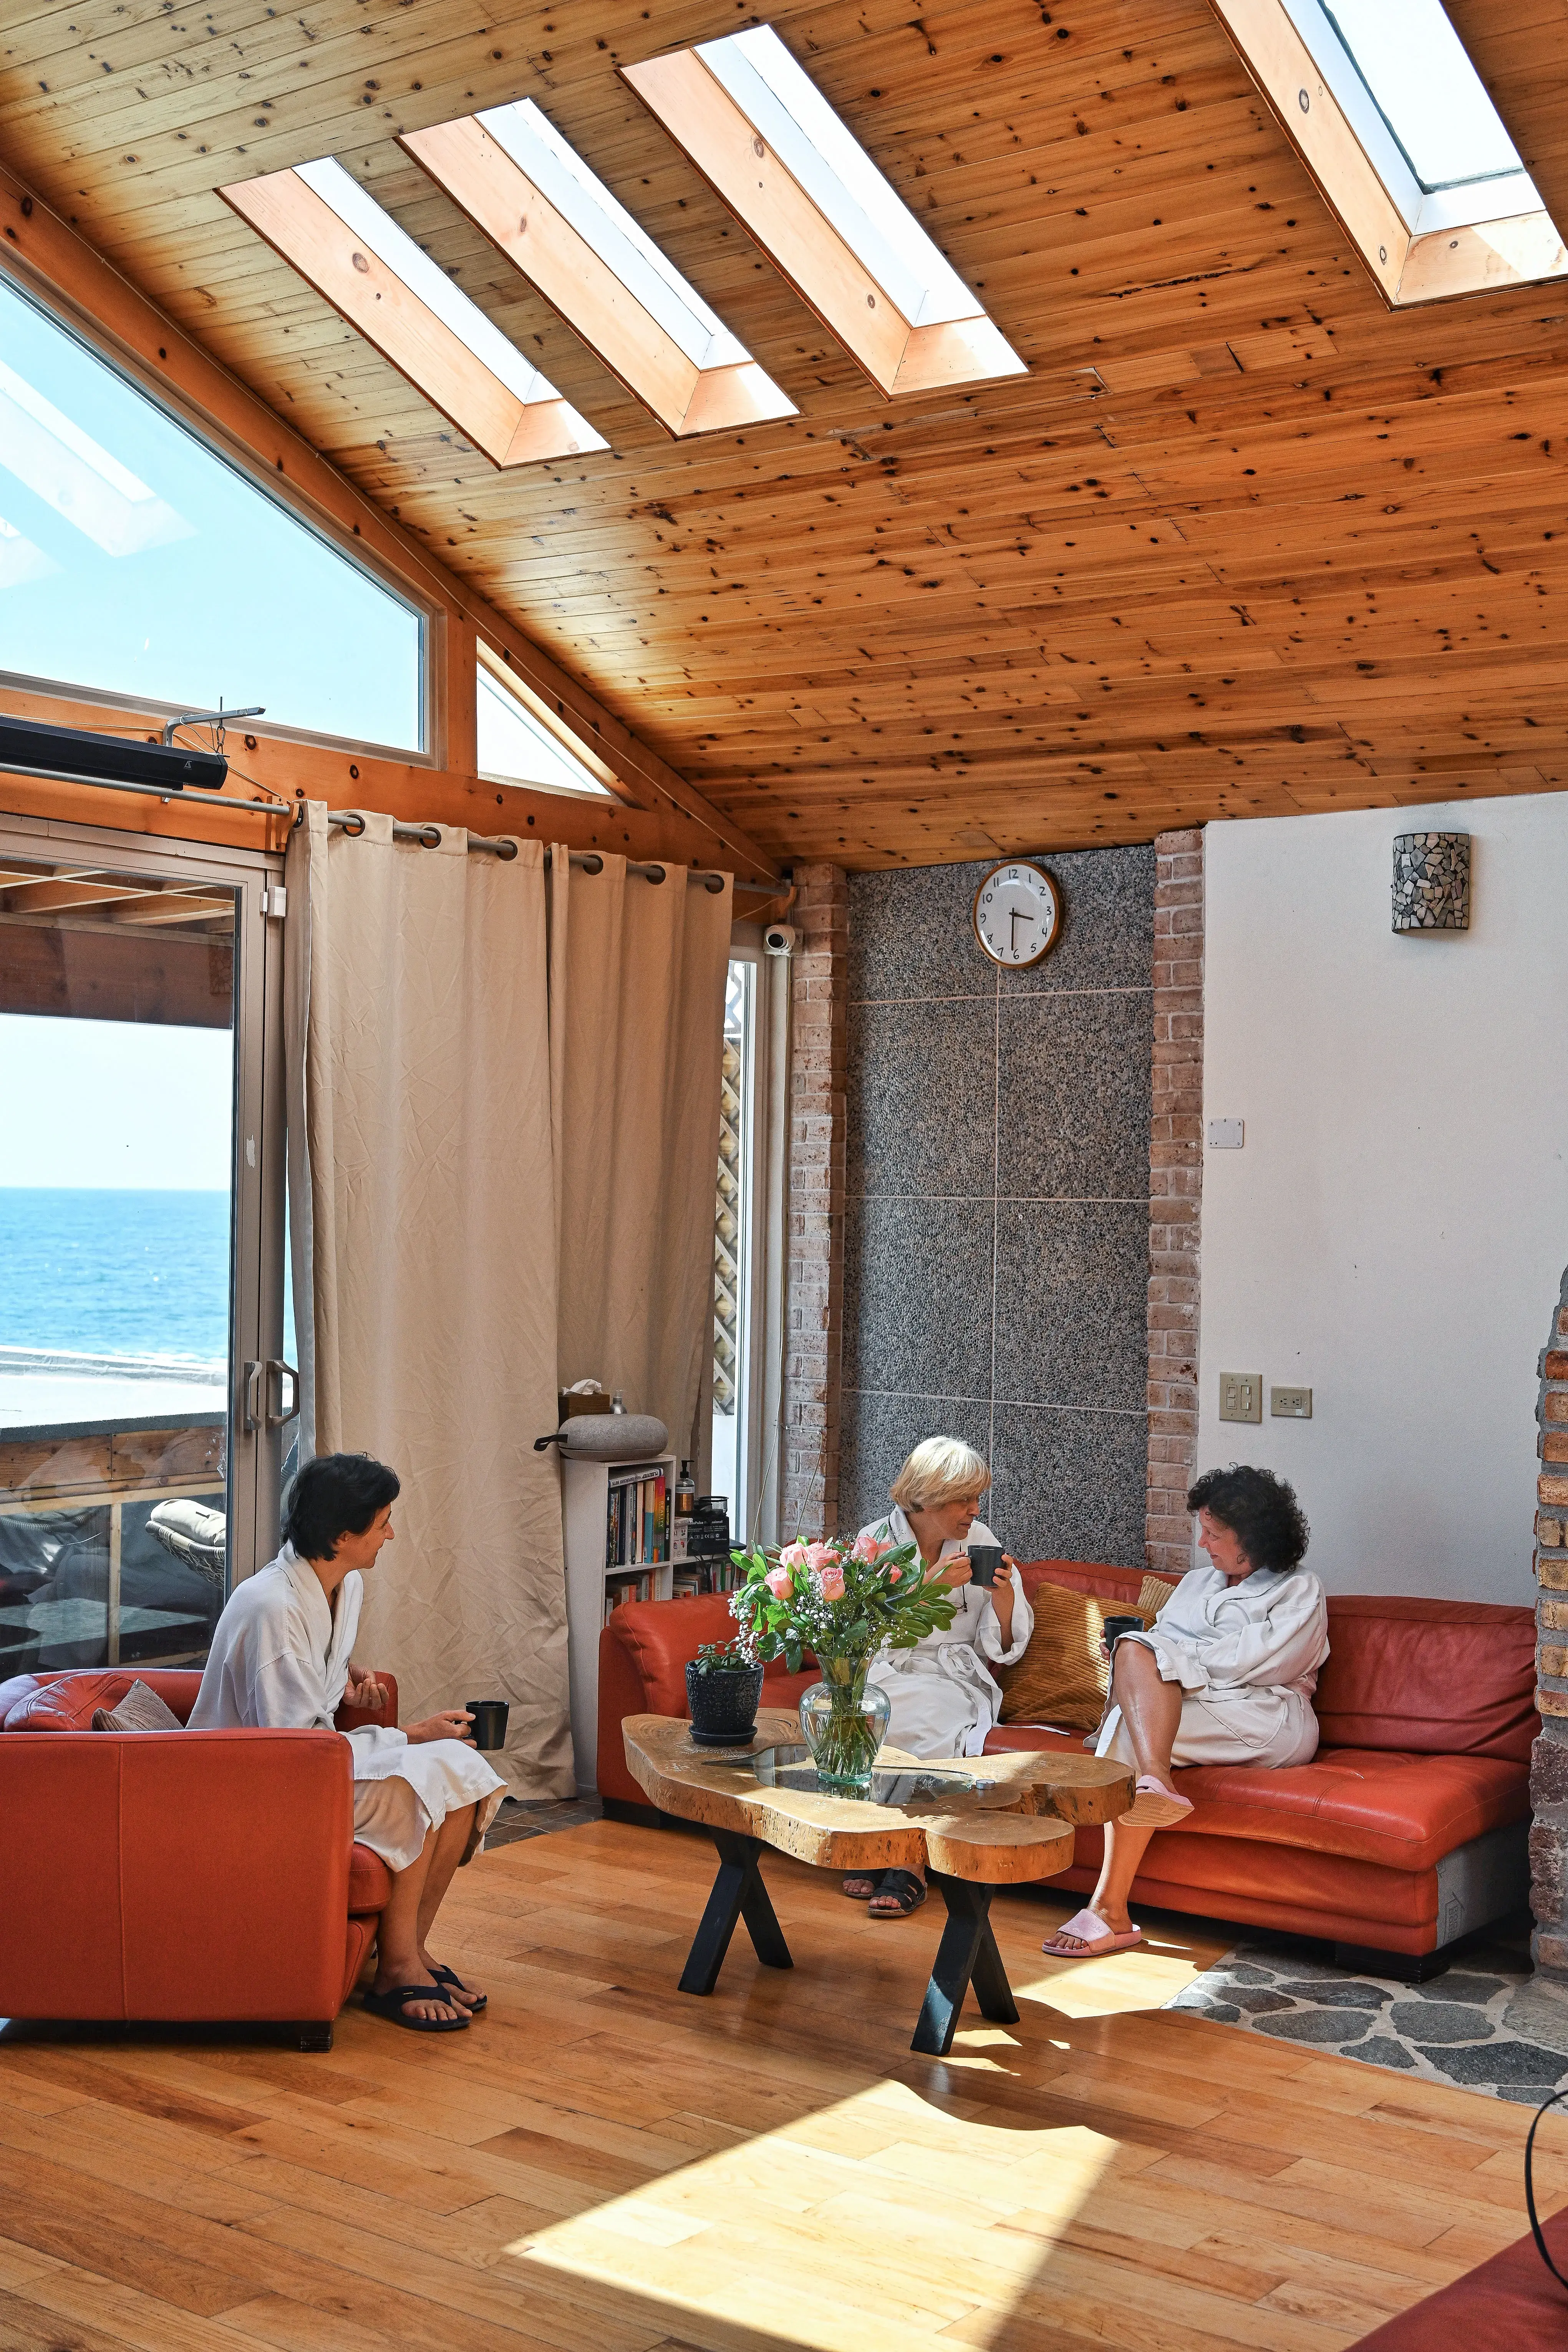 The massage room of the Santa Maria clinic is located in a separate building right by the ocean, with panoramic windows on four sides